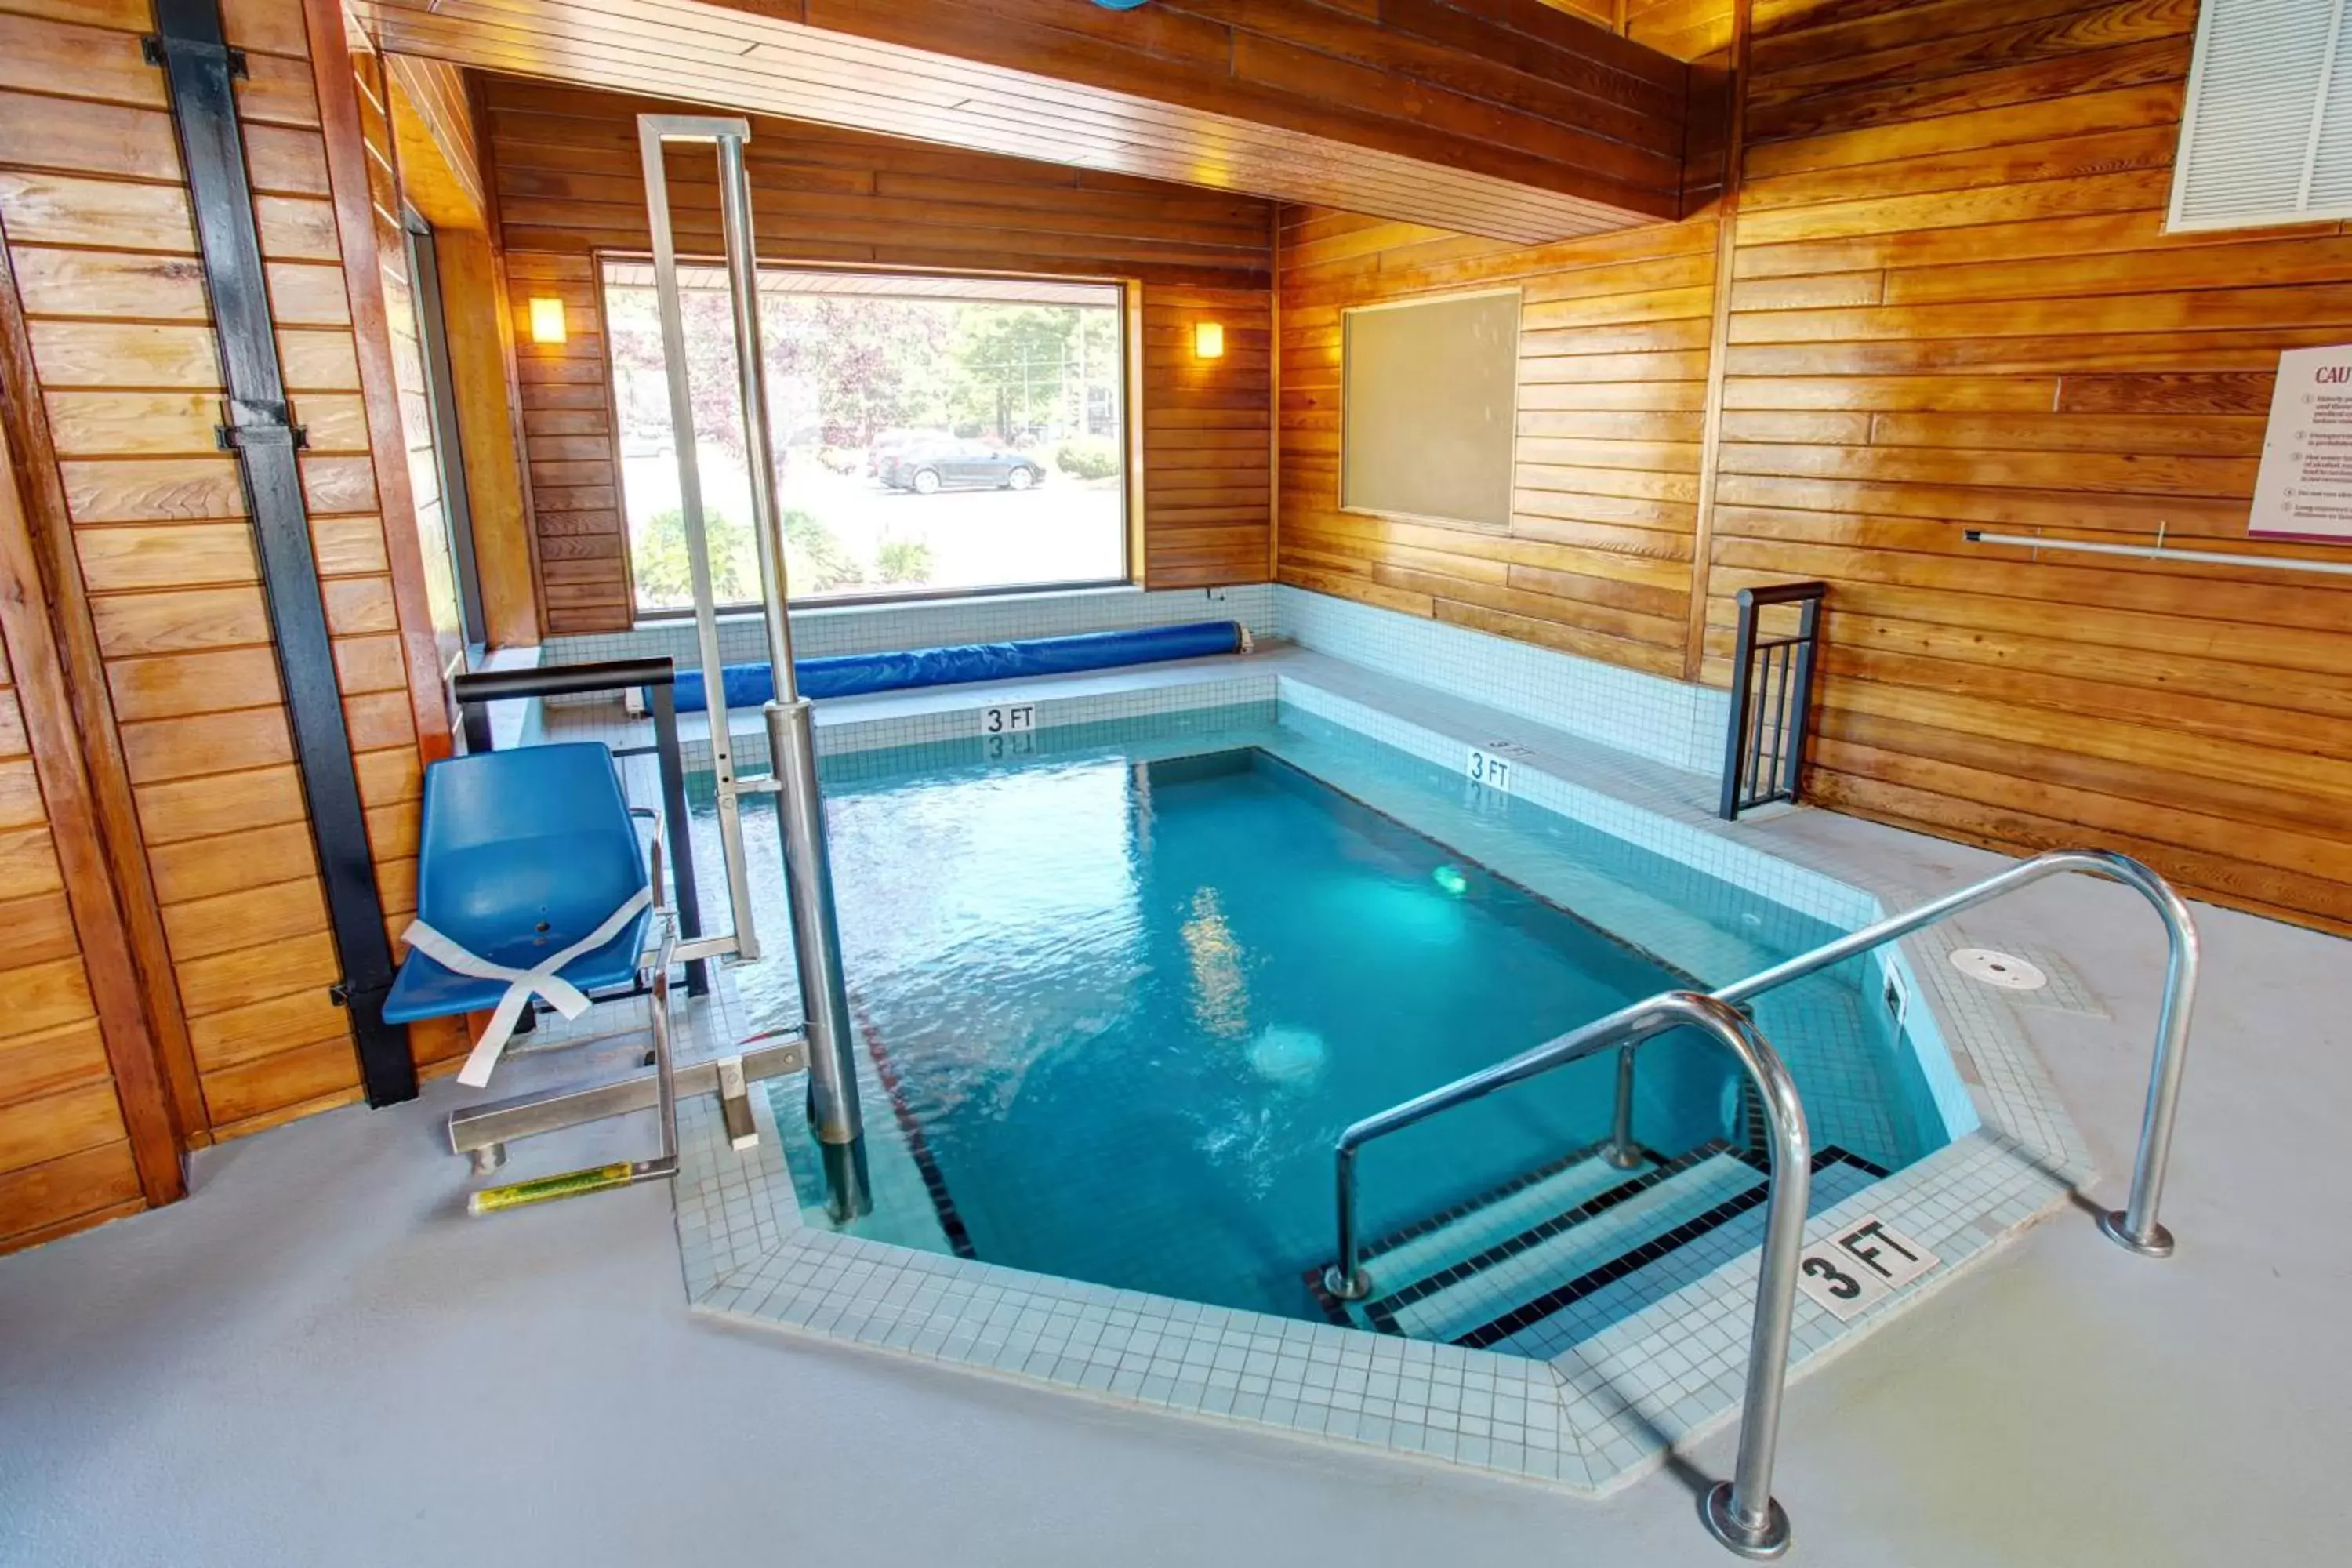 Hot Tub, Swimming Pool in Country Inn & Suites by Radisson, Traverse City, MI